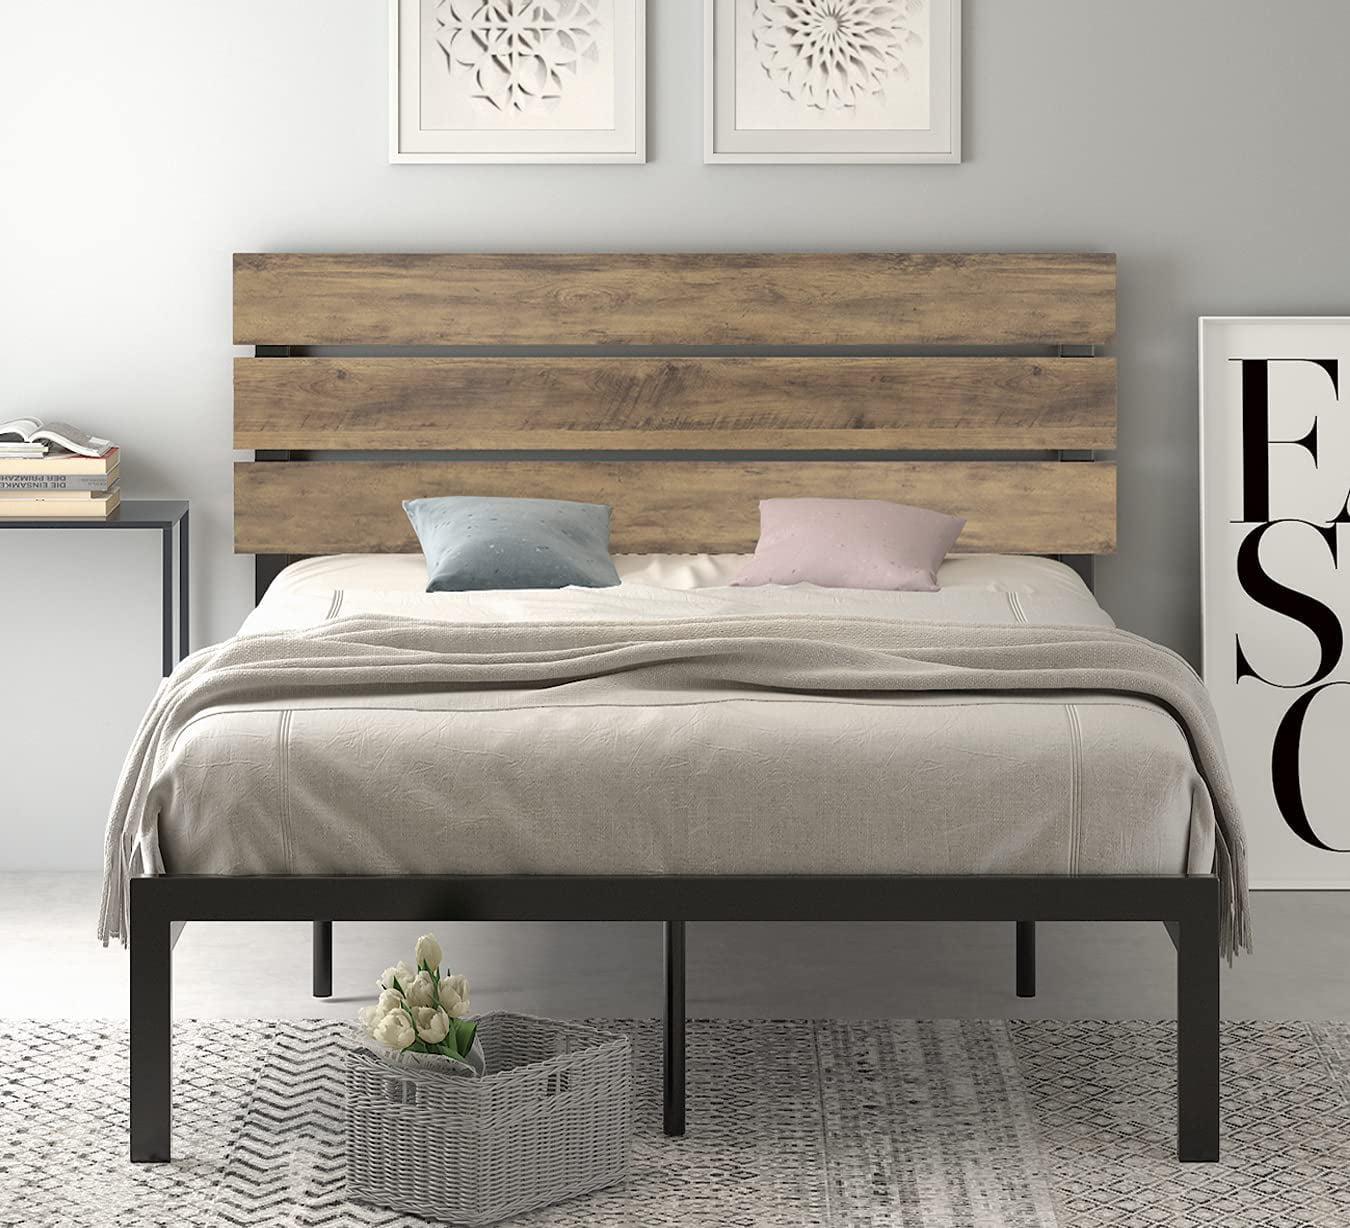 Details about   Full/Queen Size Metal Platform Bed Frame w/Wooden Headboard Rustic Country Style 